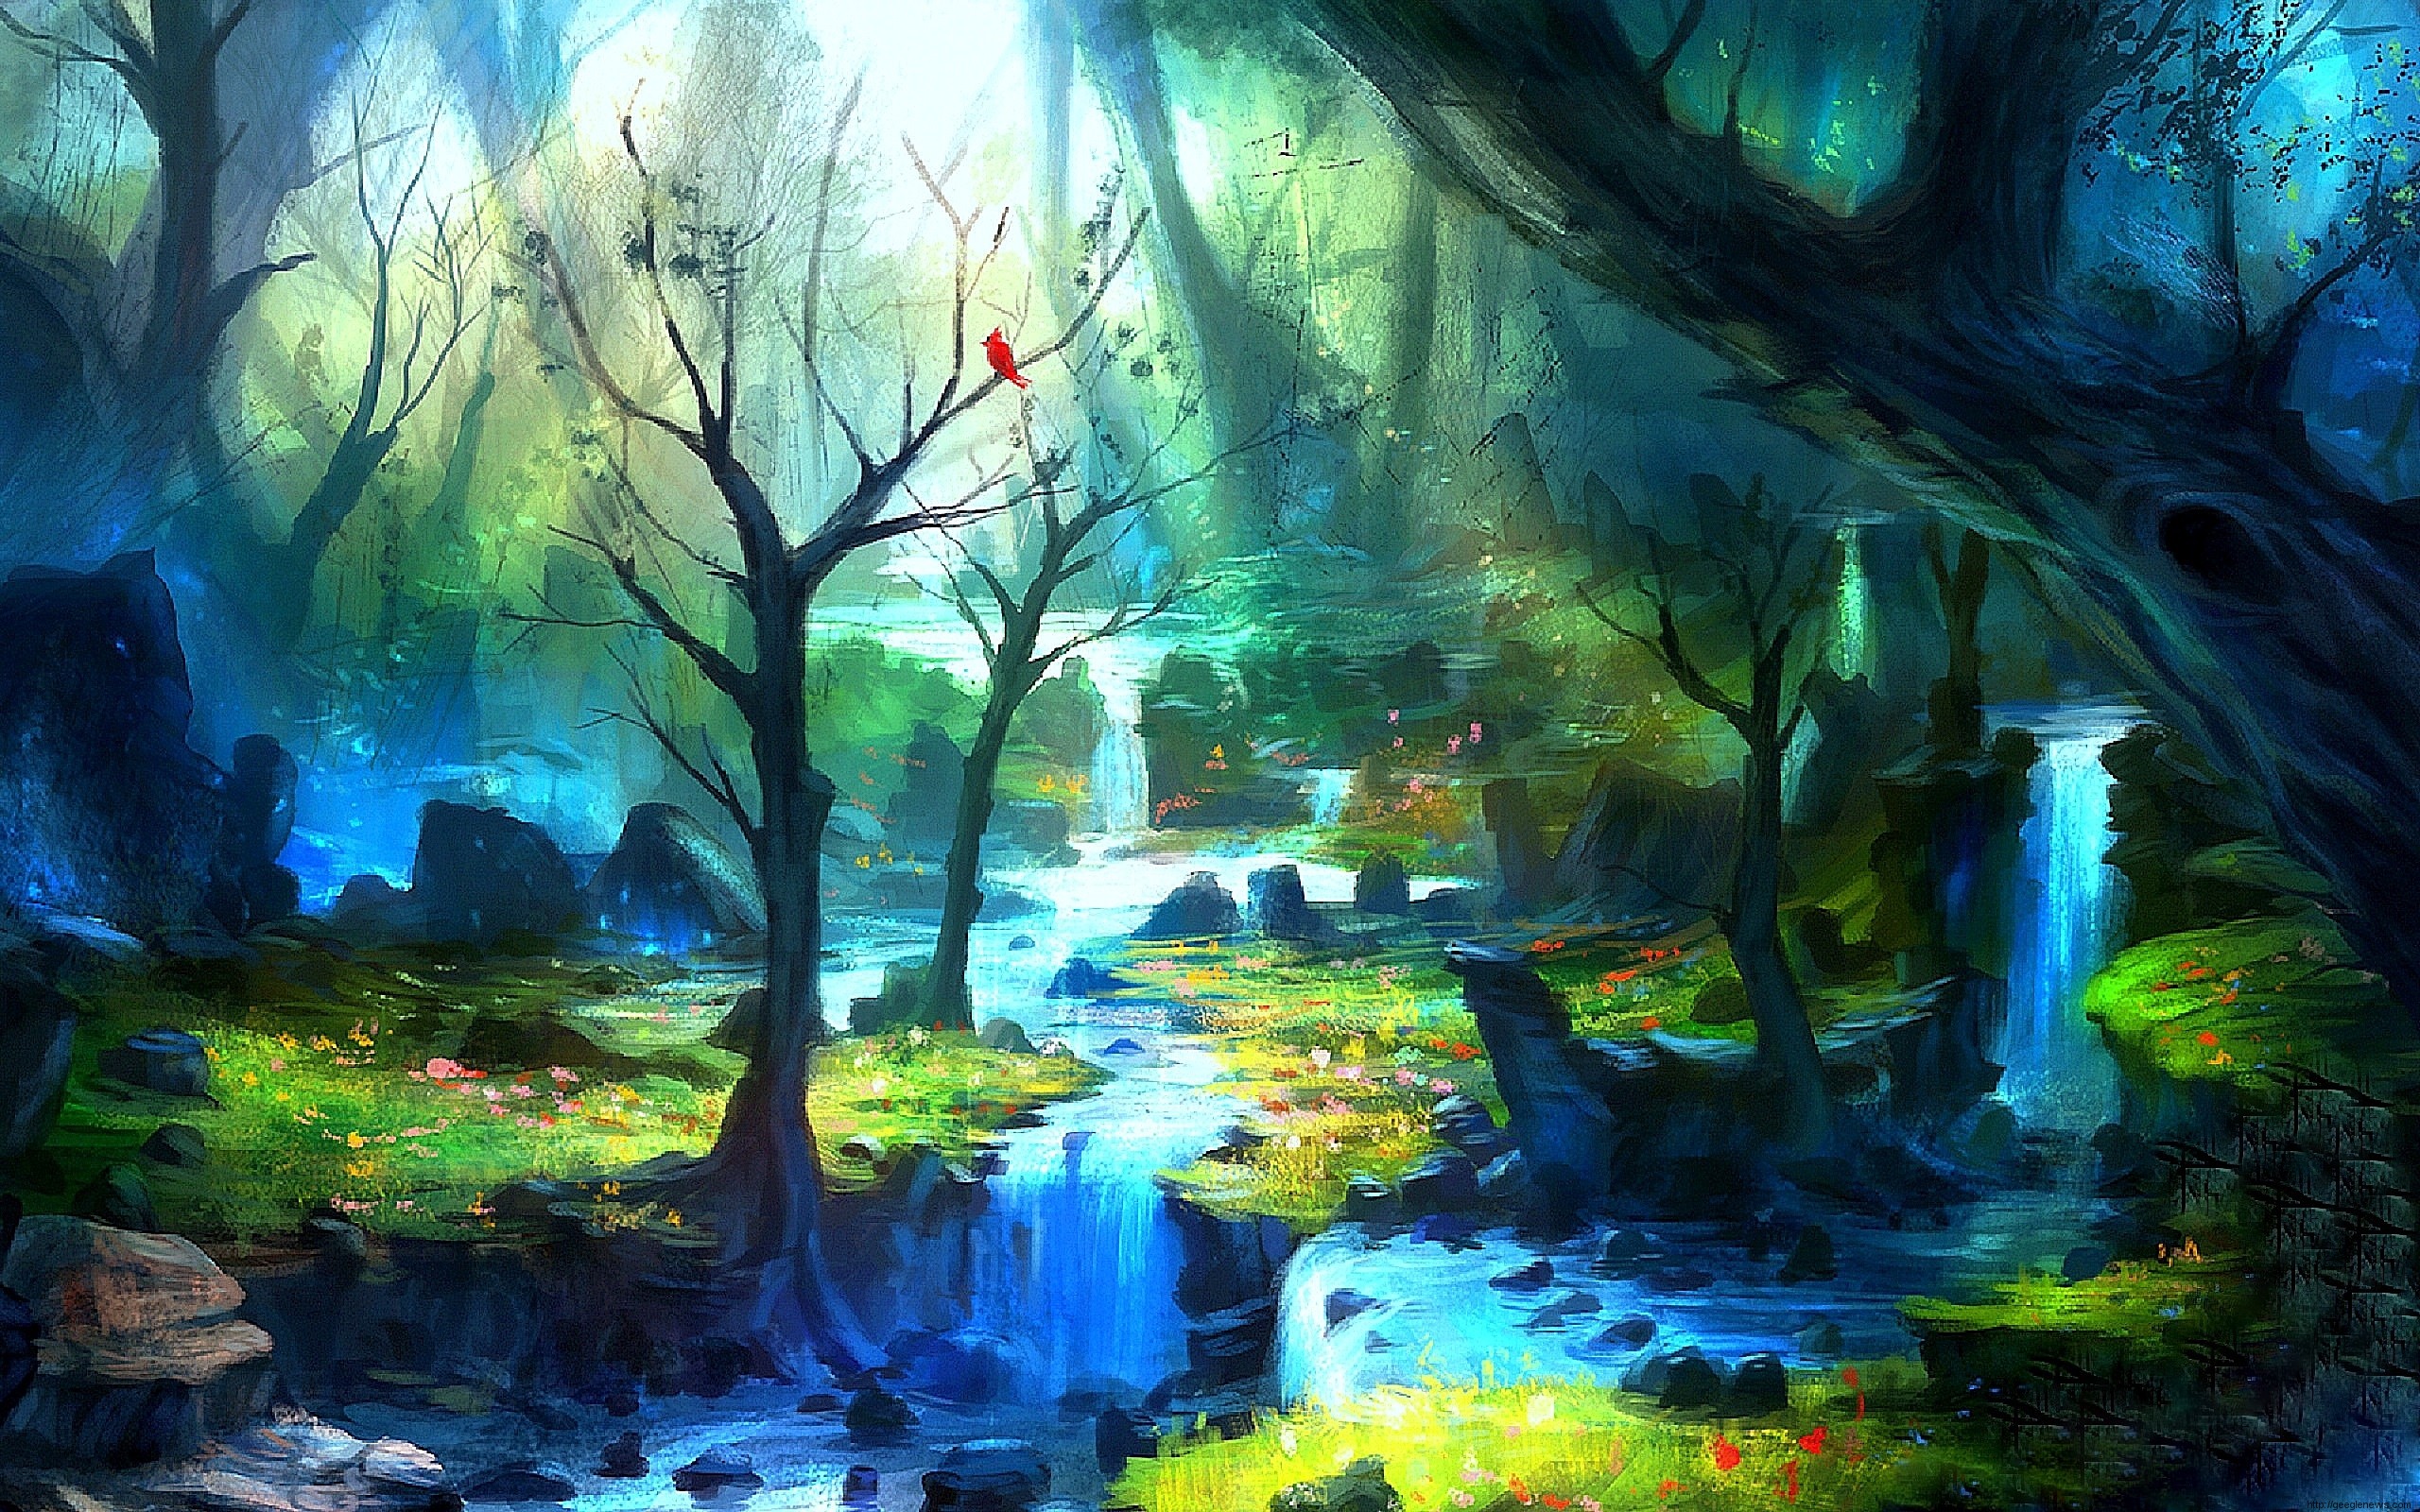 enchanted wallpaper,nature,natural landscape,natural environment,painting,forest